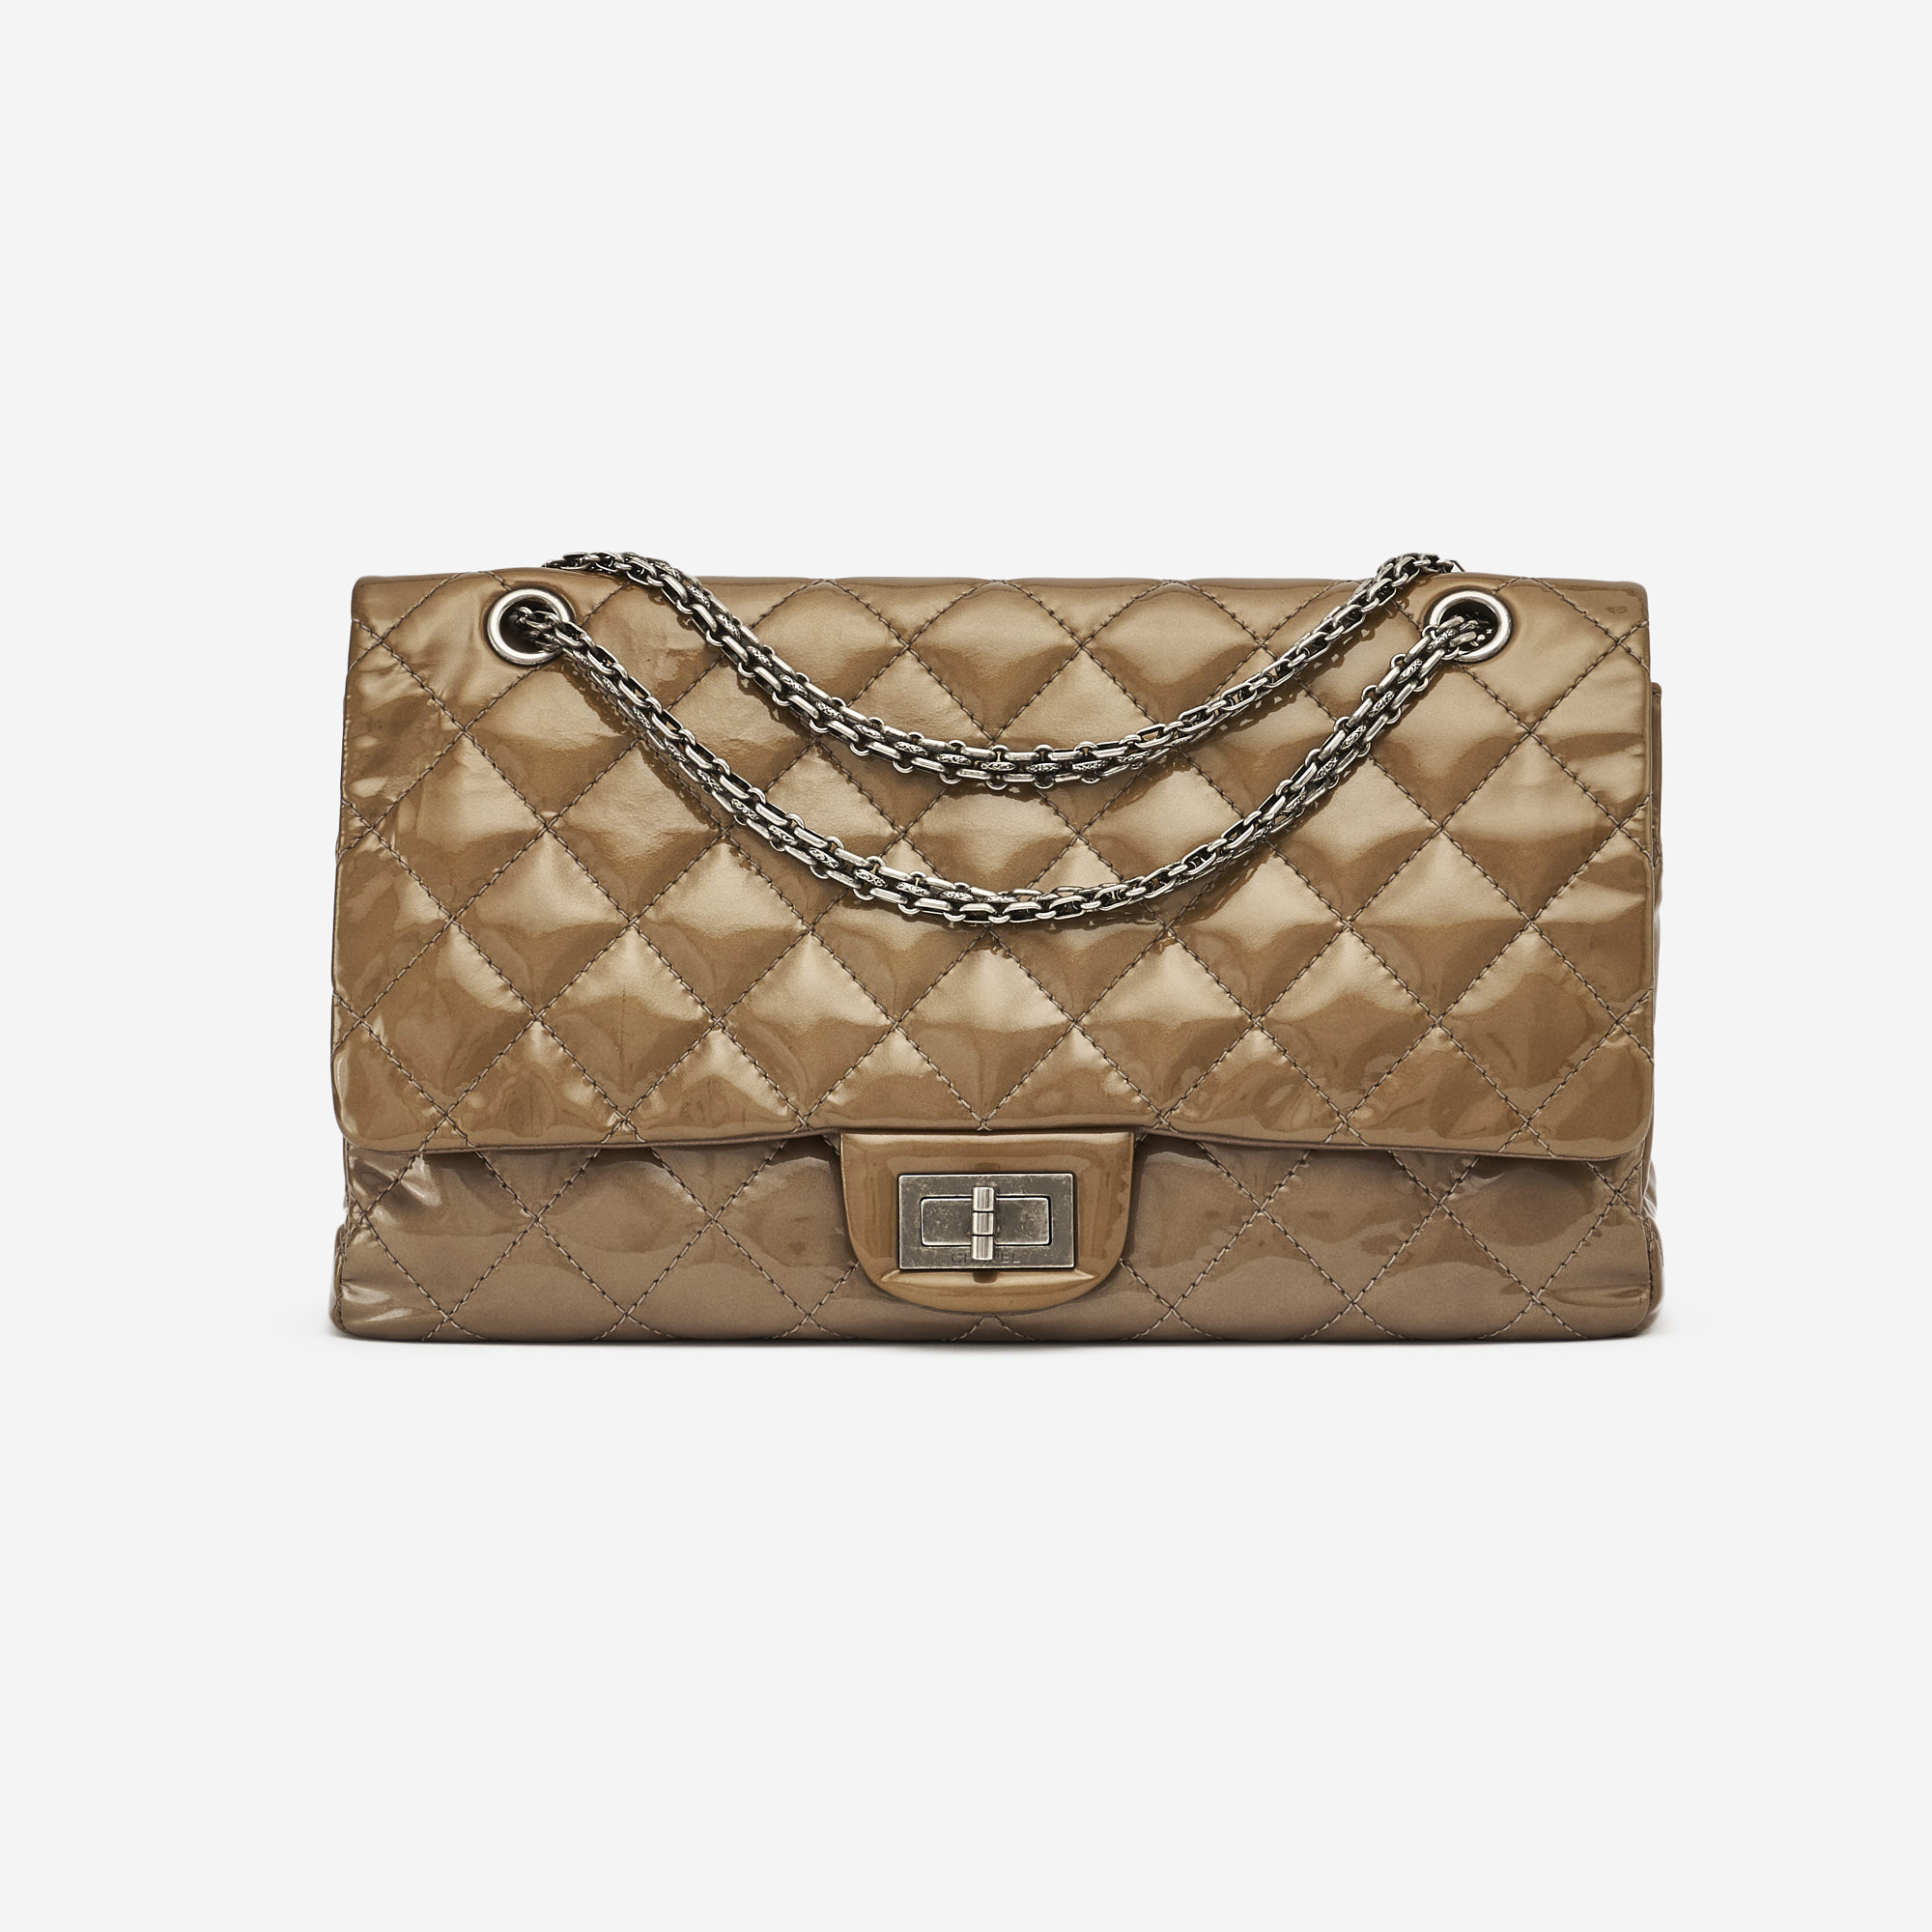 34970-01_Chanel_Chain_Around_Flap_Bag_Quilted_Leat_2D_0002.jpg?v=1575949451